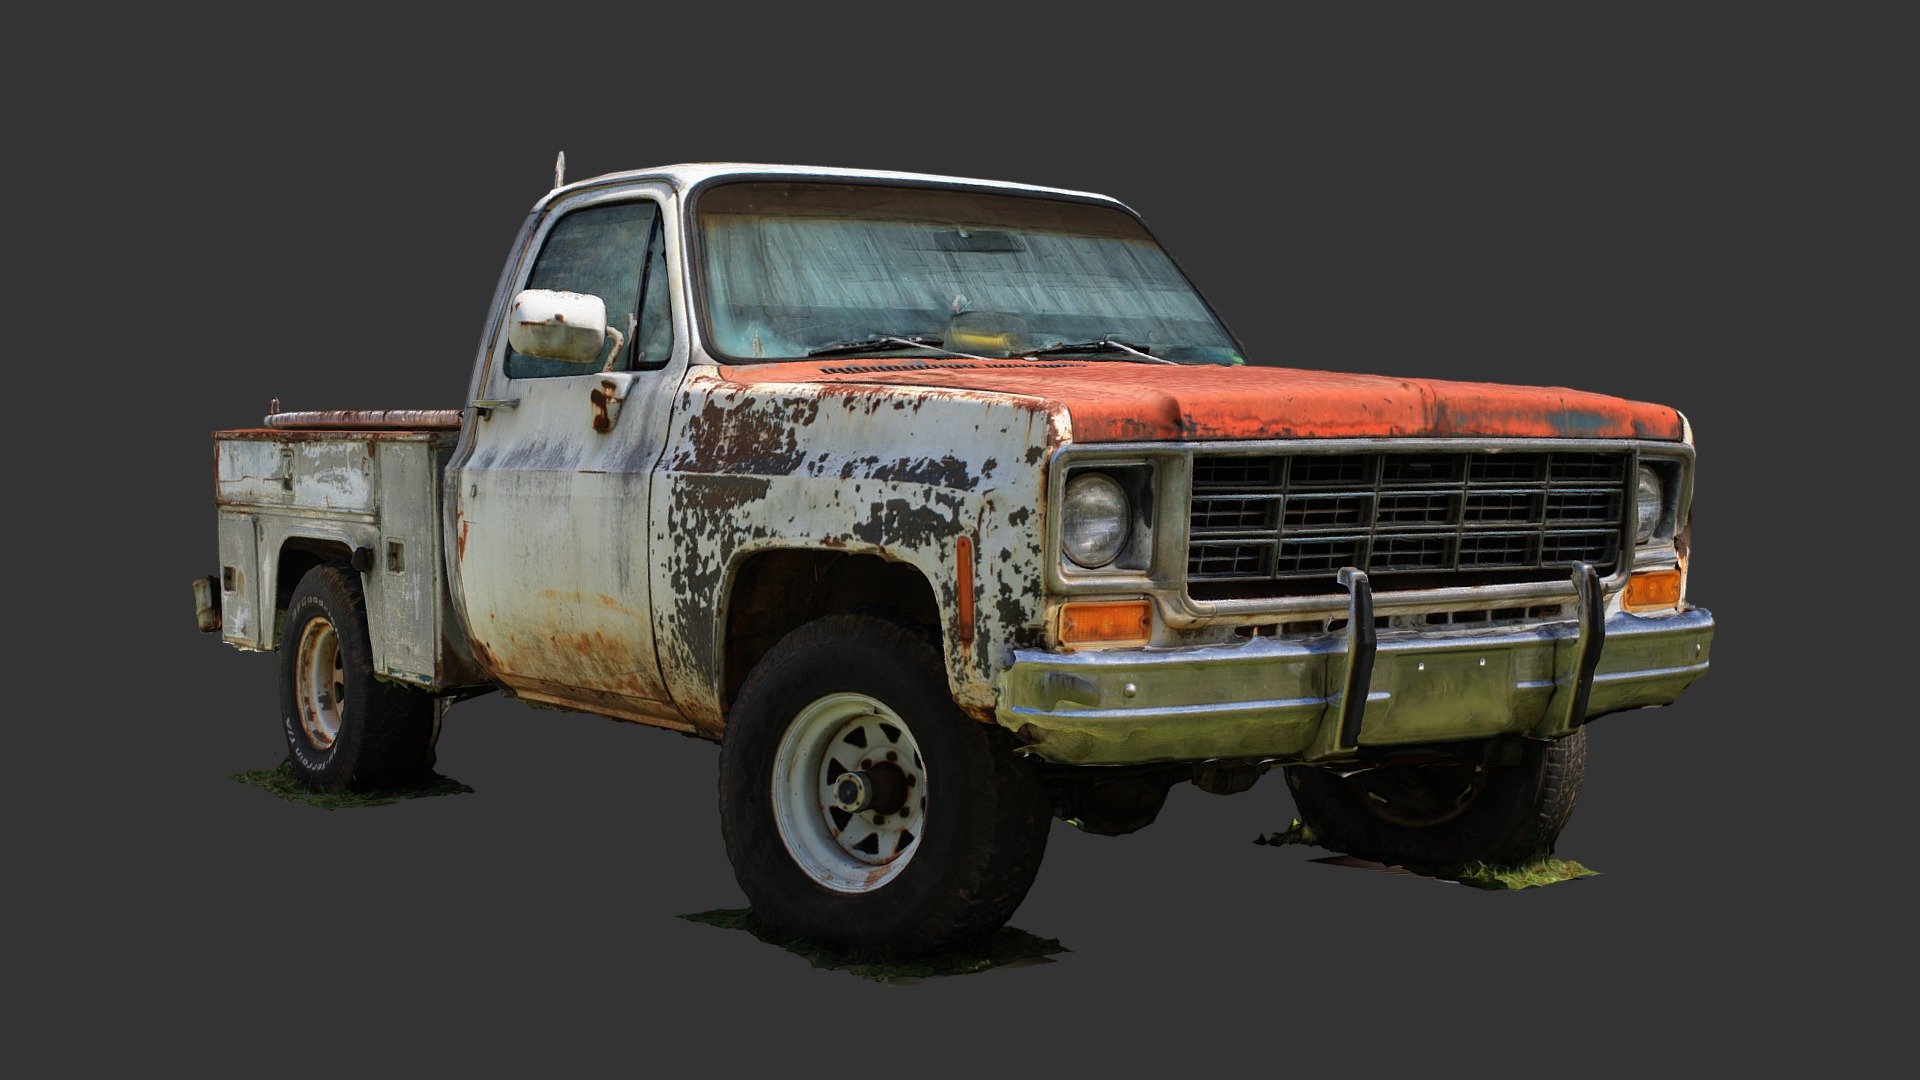 Raw scan of a mid-70's Chevrolet truck with a utility bed, processed well due to surface detail, but the lighting conditions leave a lot to be desired.

Processed in RealityCapture from 195 photos taken with my Canon EOS Rebel XSI.

Not sure why it has a Bahamas license plate 3d model